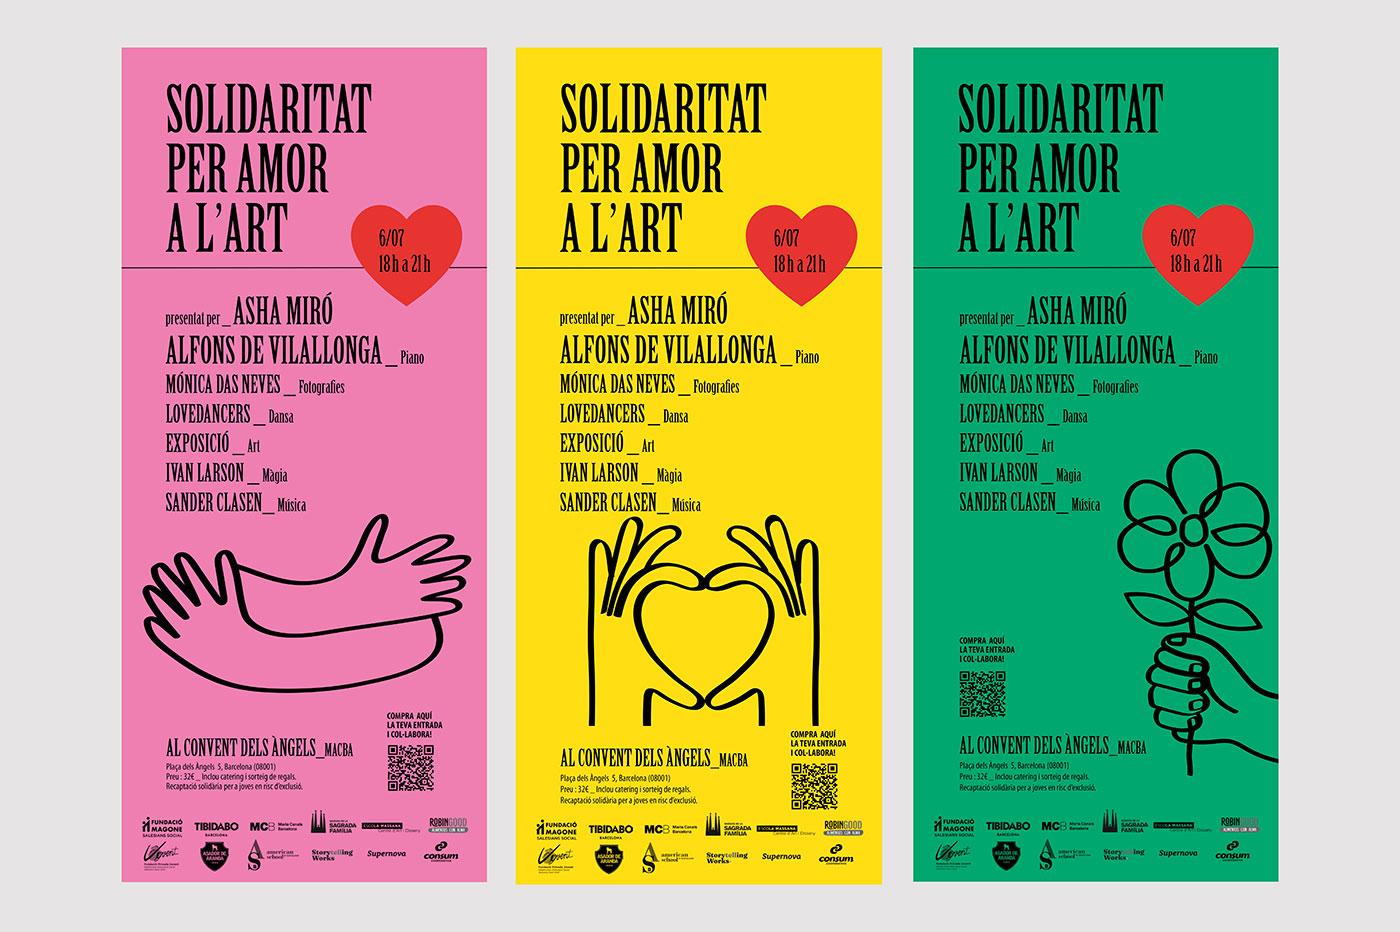 Campaign "Solidarity Love for Art"